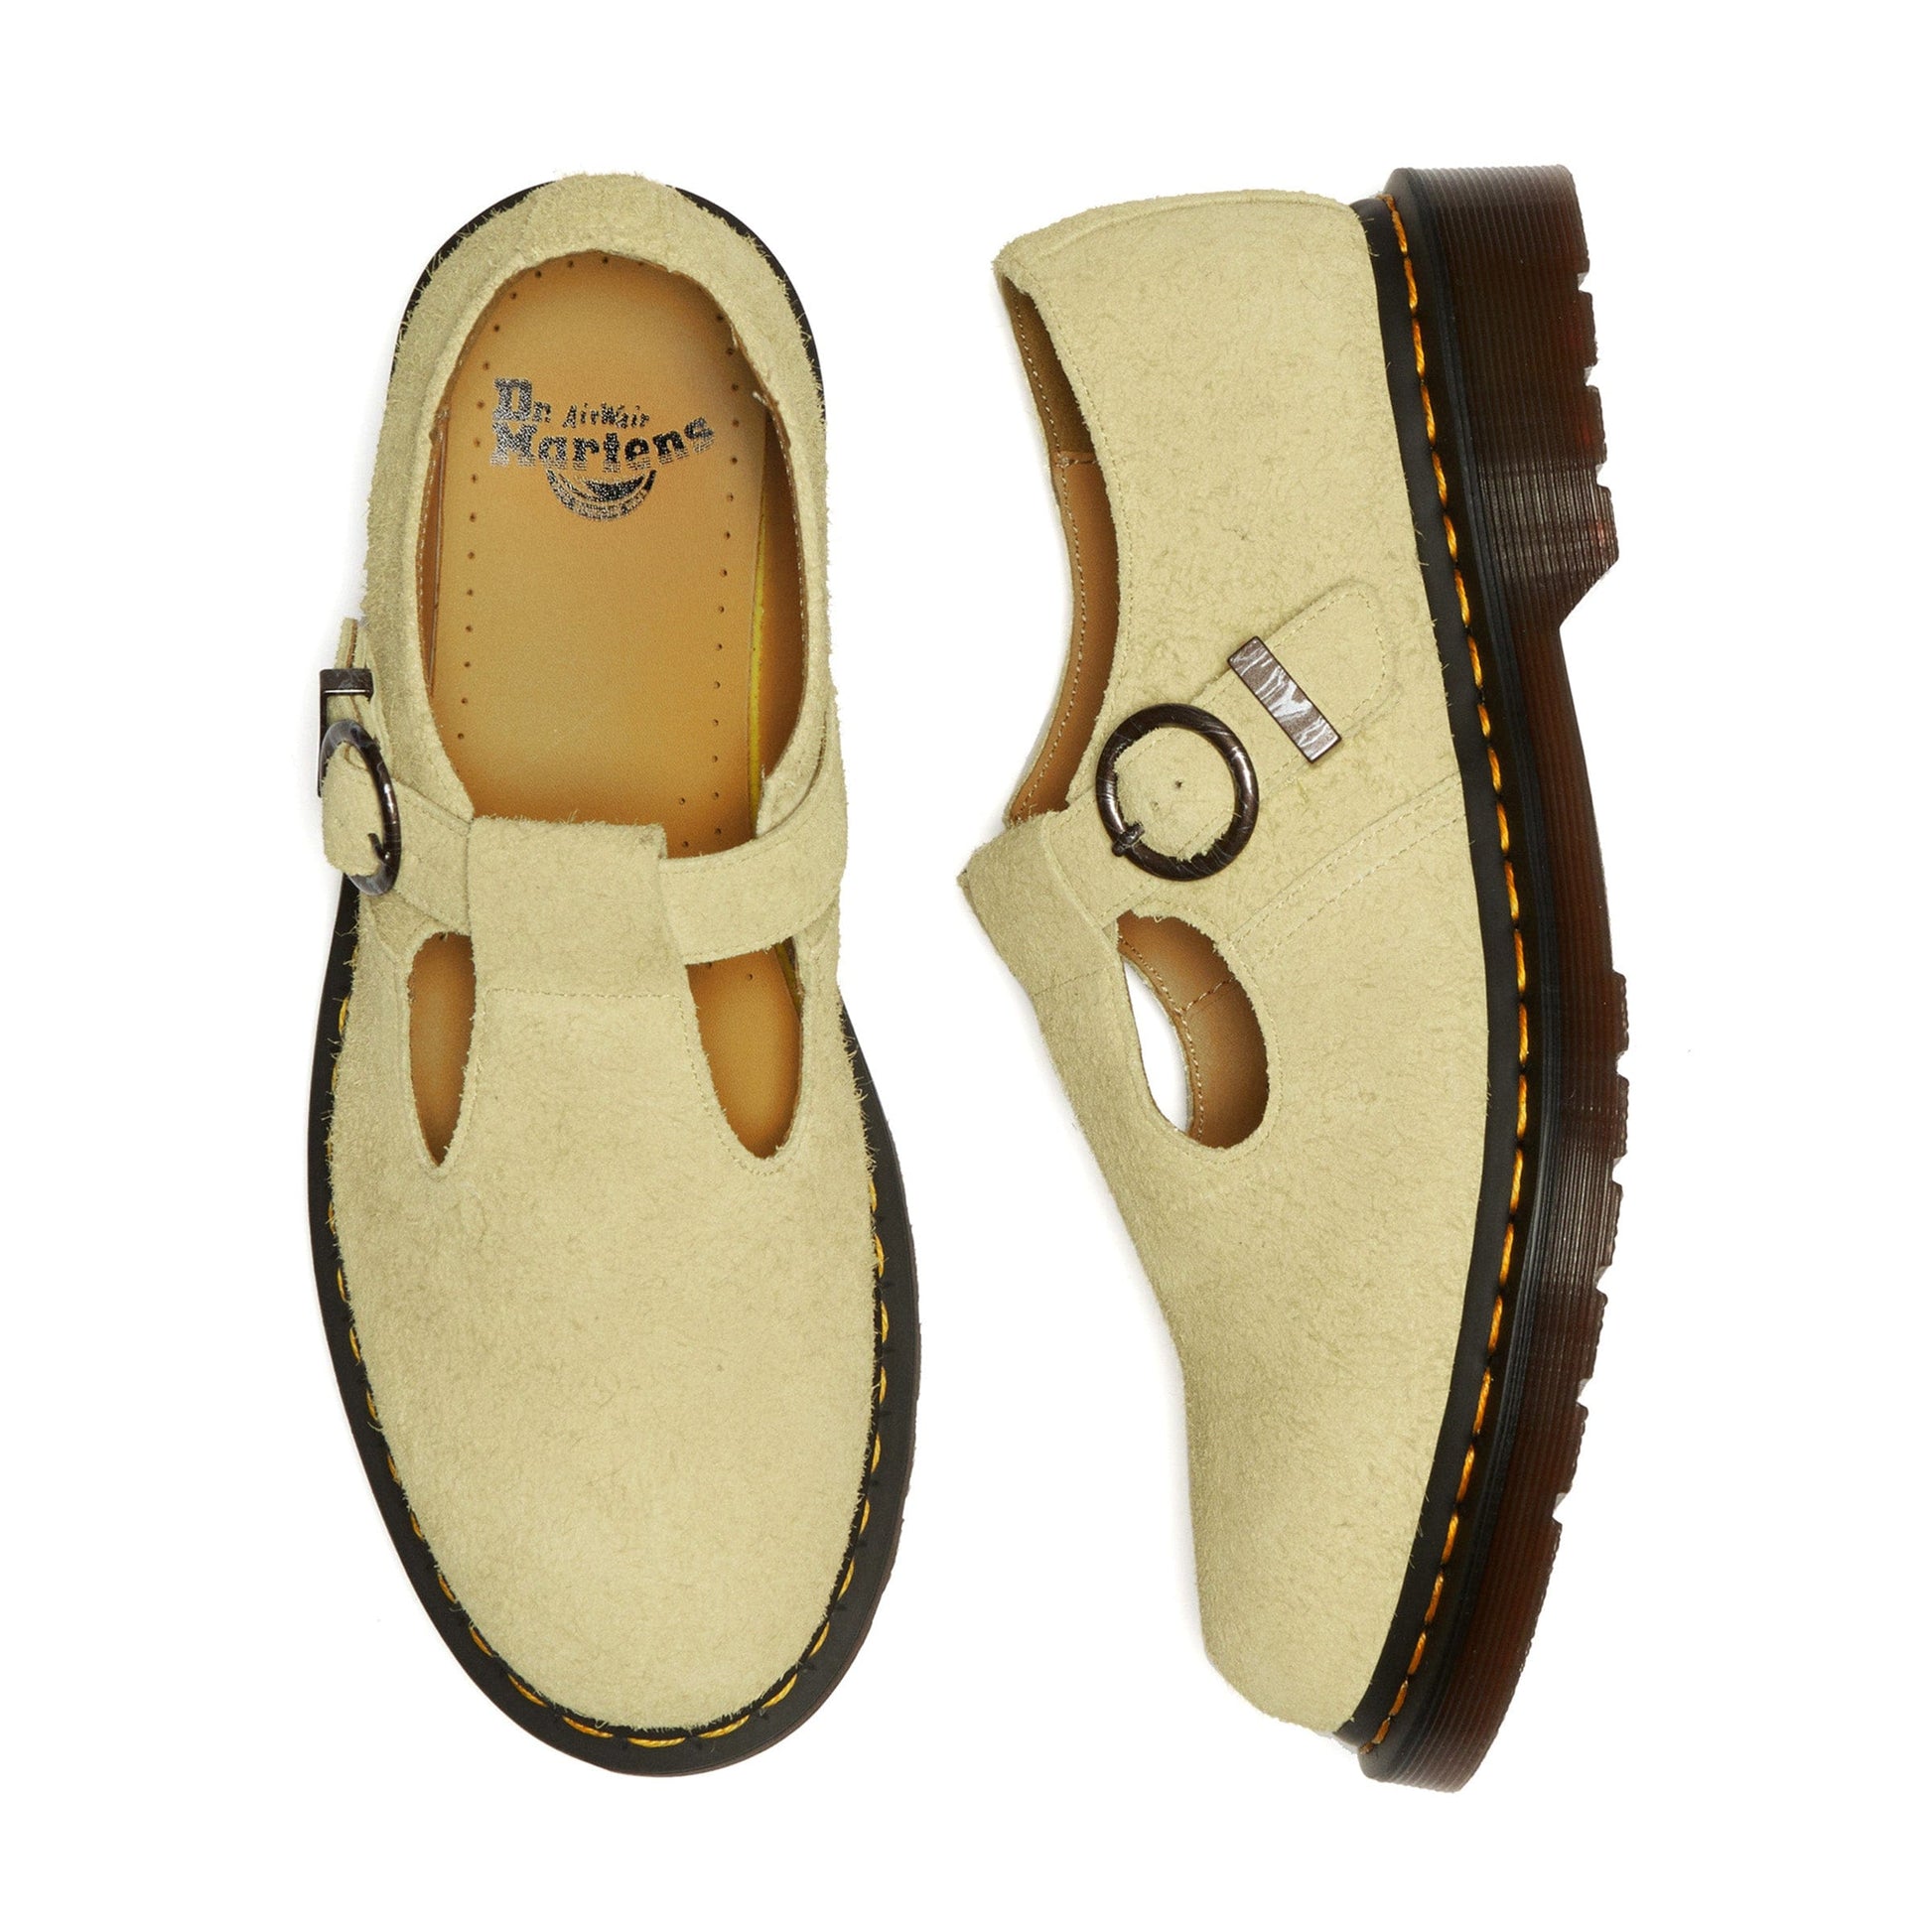 Dr. Martens Casual T-BAR MARY JANE SHOES